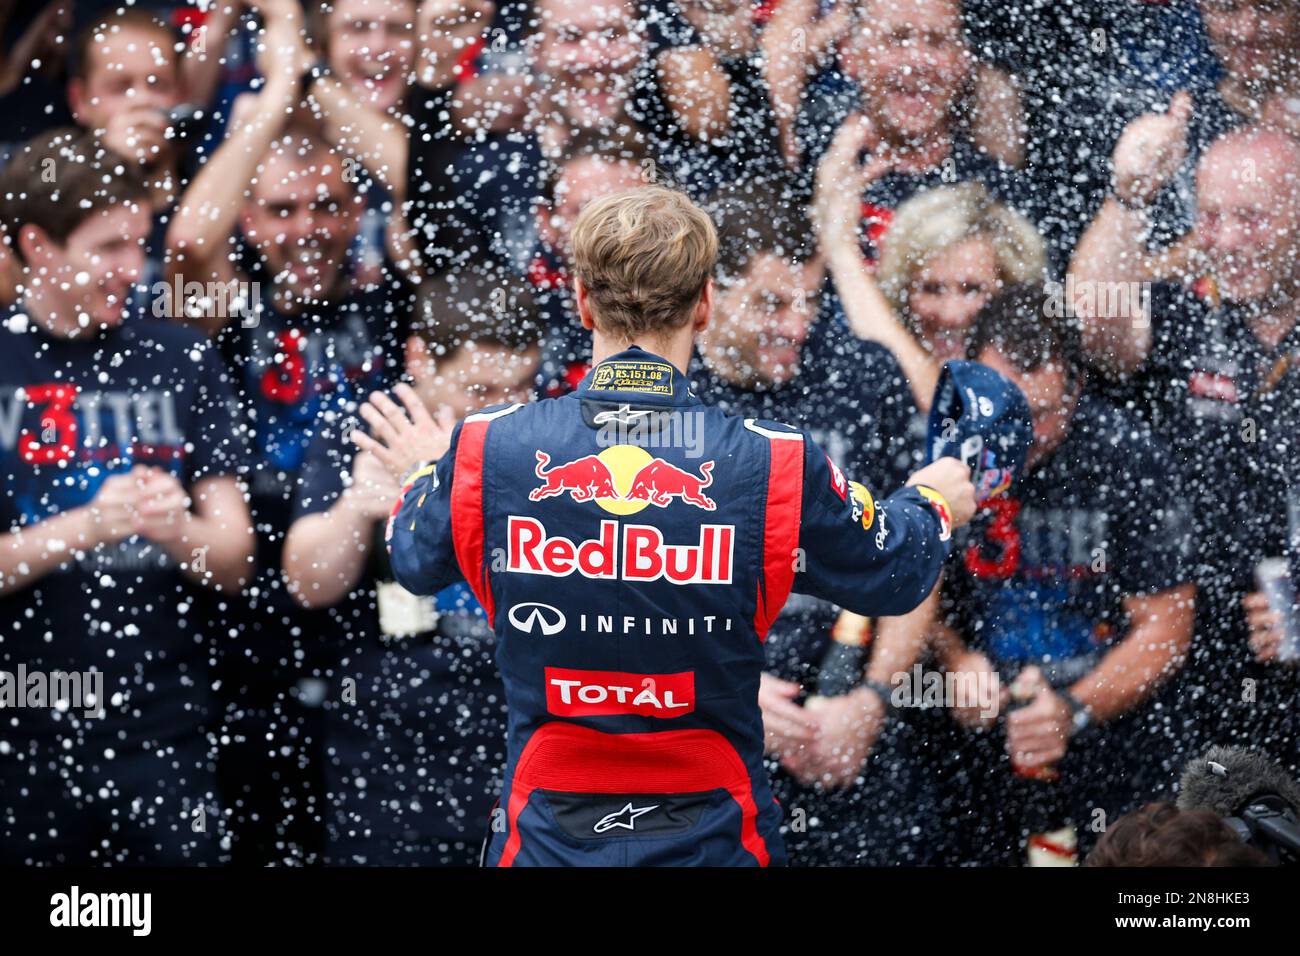 Red Bull driver Sebastian Vettel of Germany, center, is sprayed with  champagne after vowing to his team in celebration after the Brazil's  Formula One Grand Prix at the Interlagos race track in